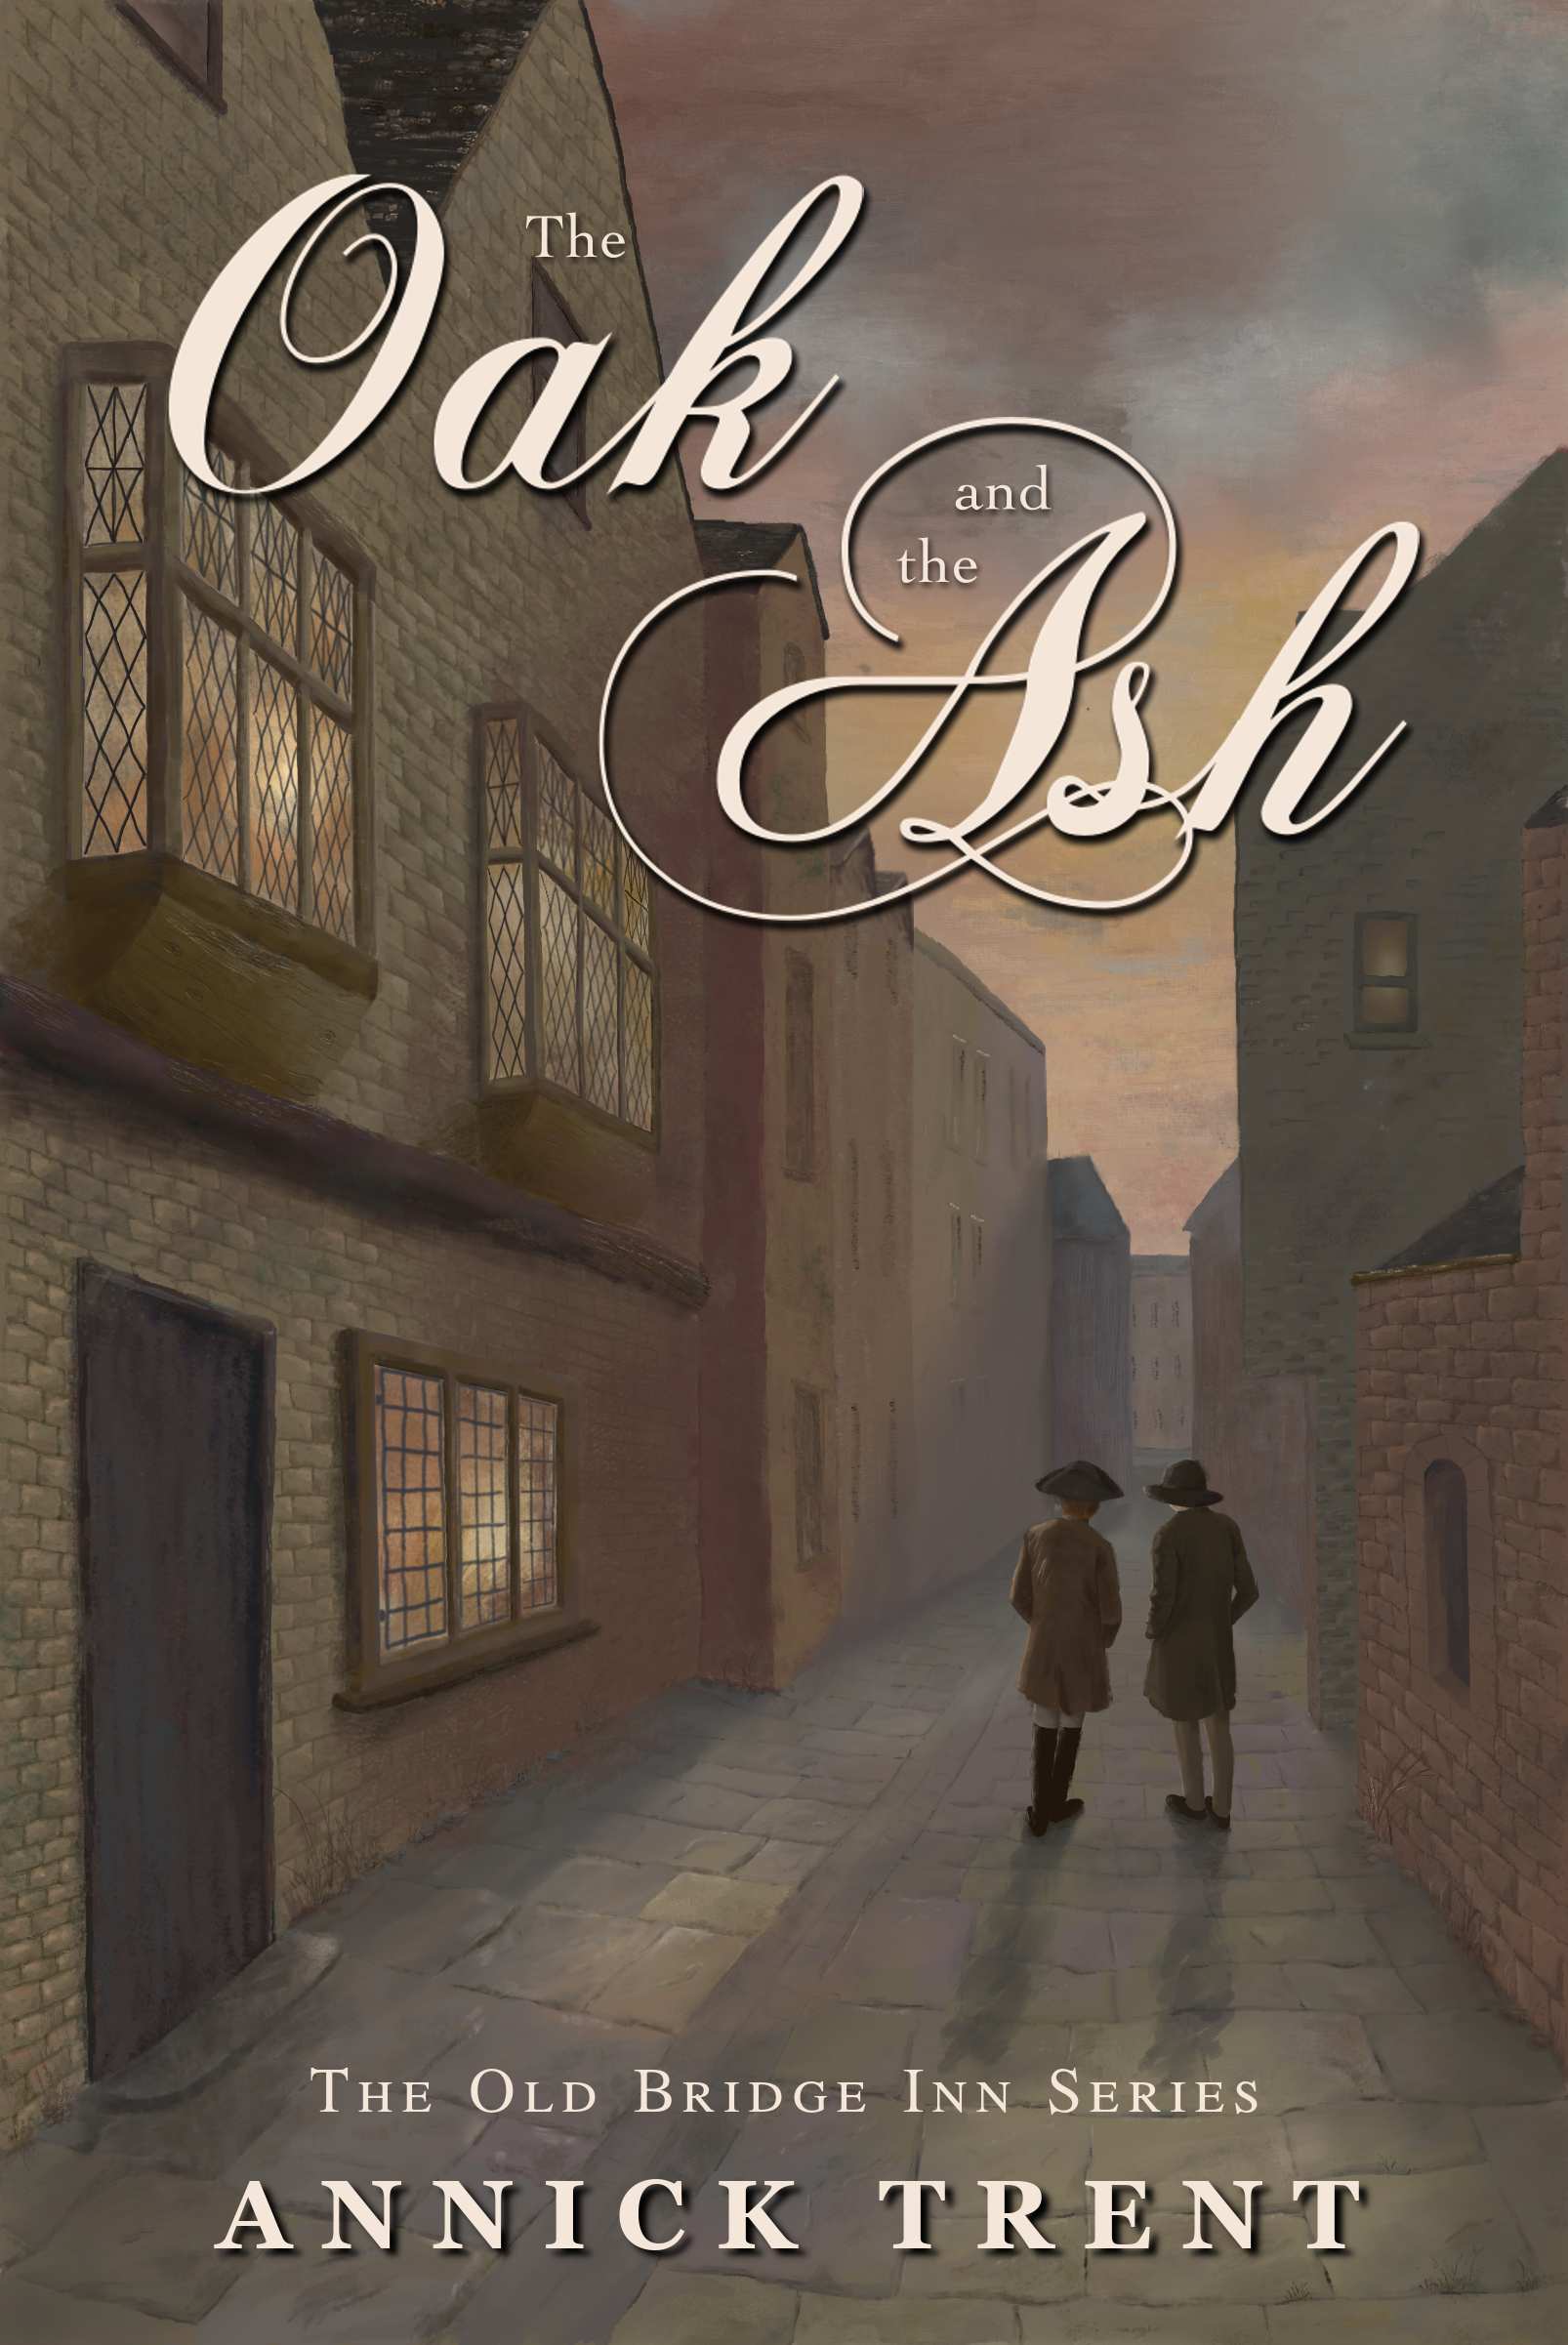 book cover of The Oak and the Ash; two men in late 18th century dress walking in a back alley at sunset